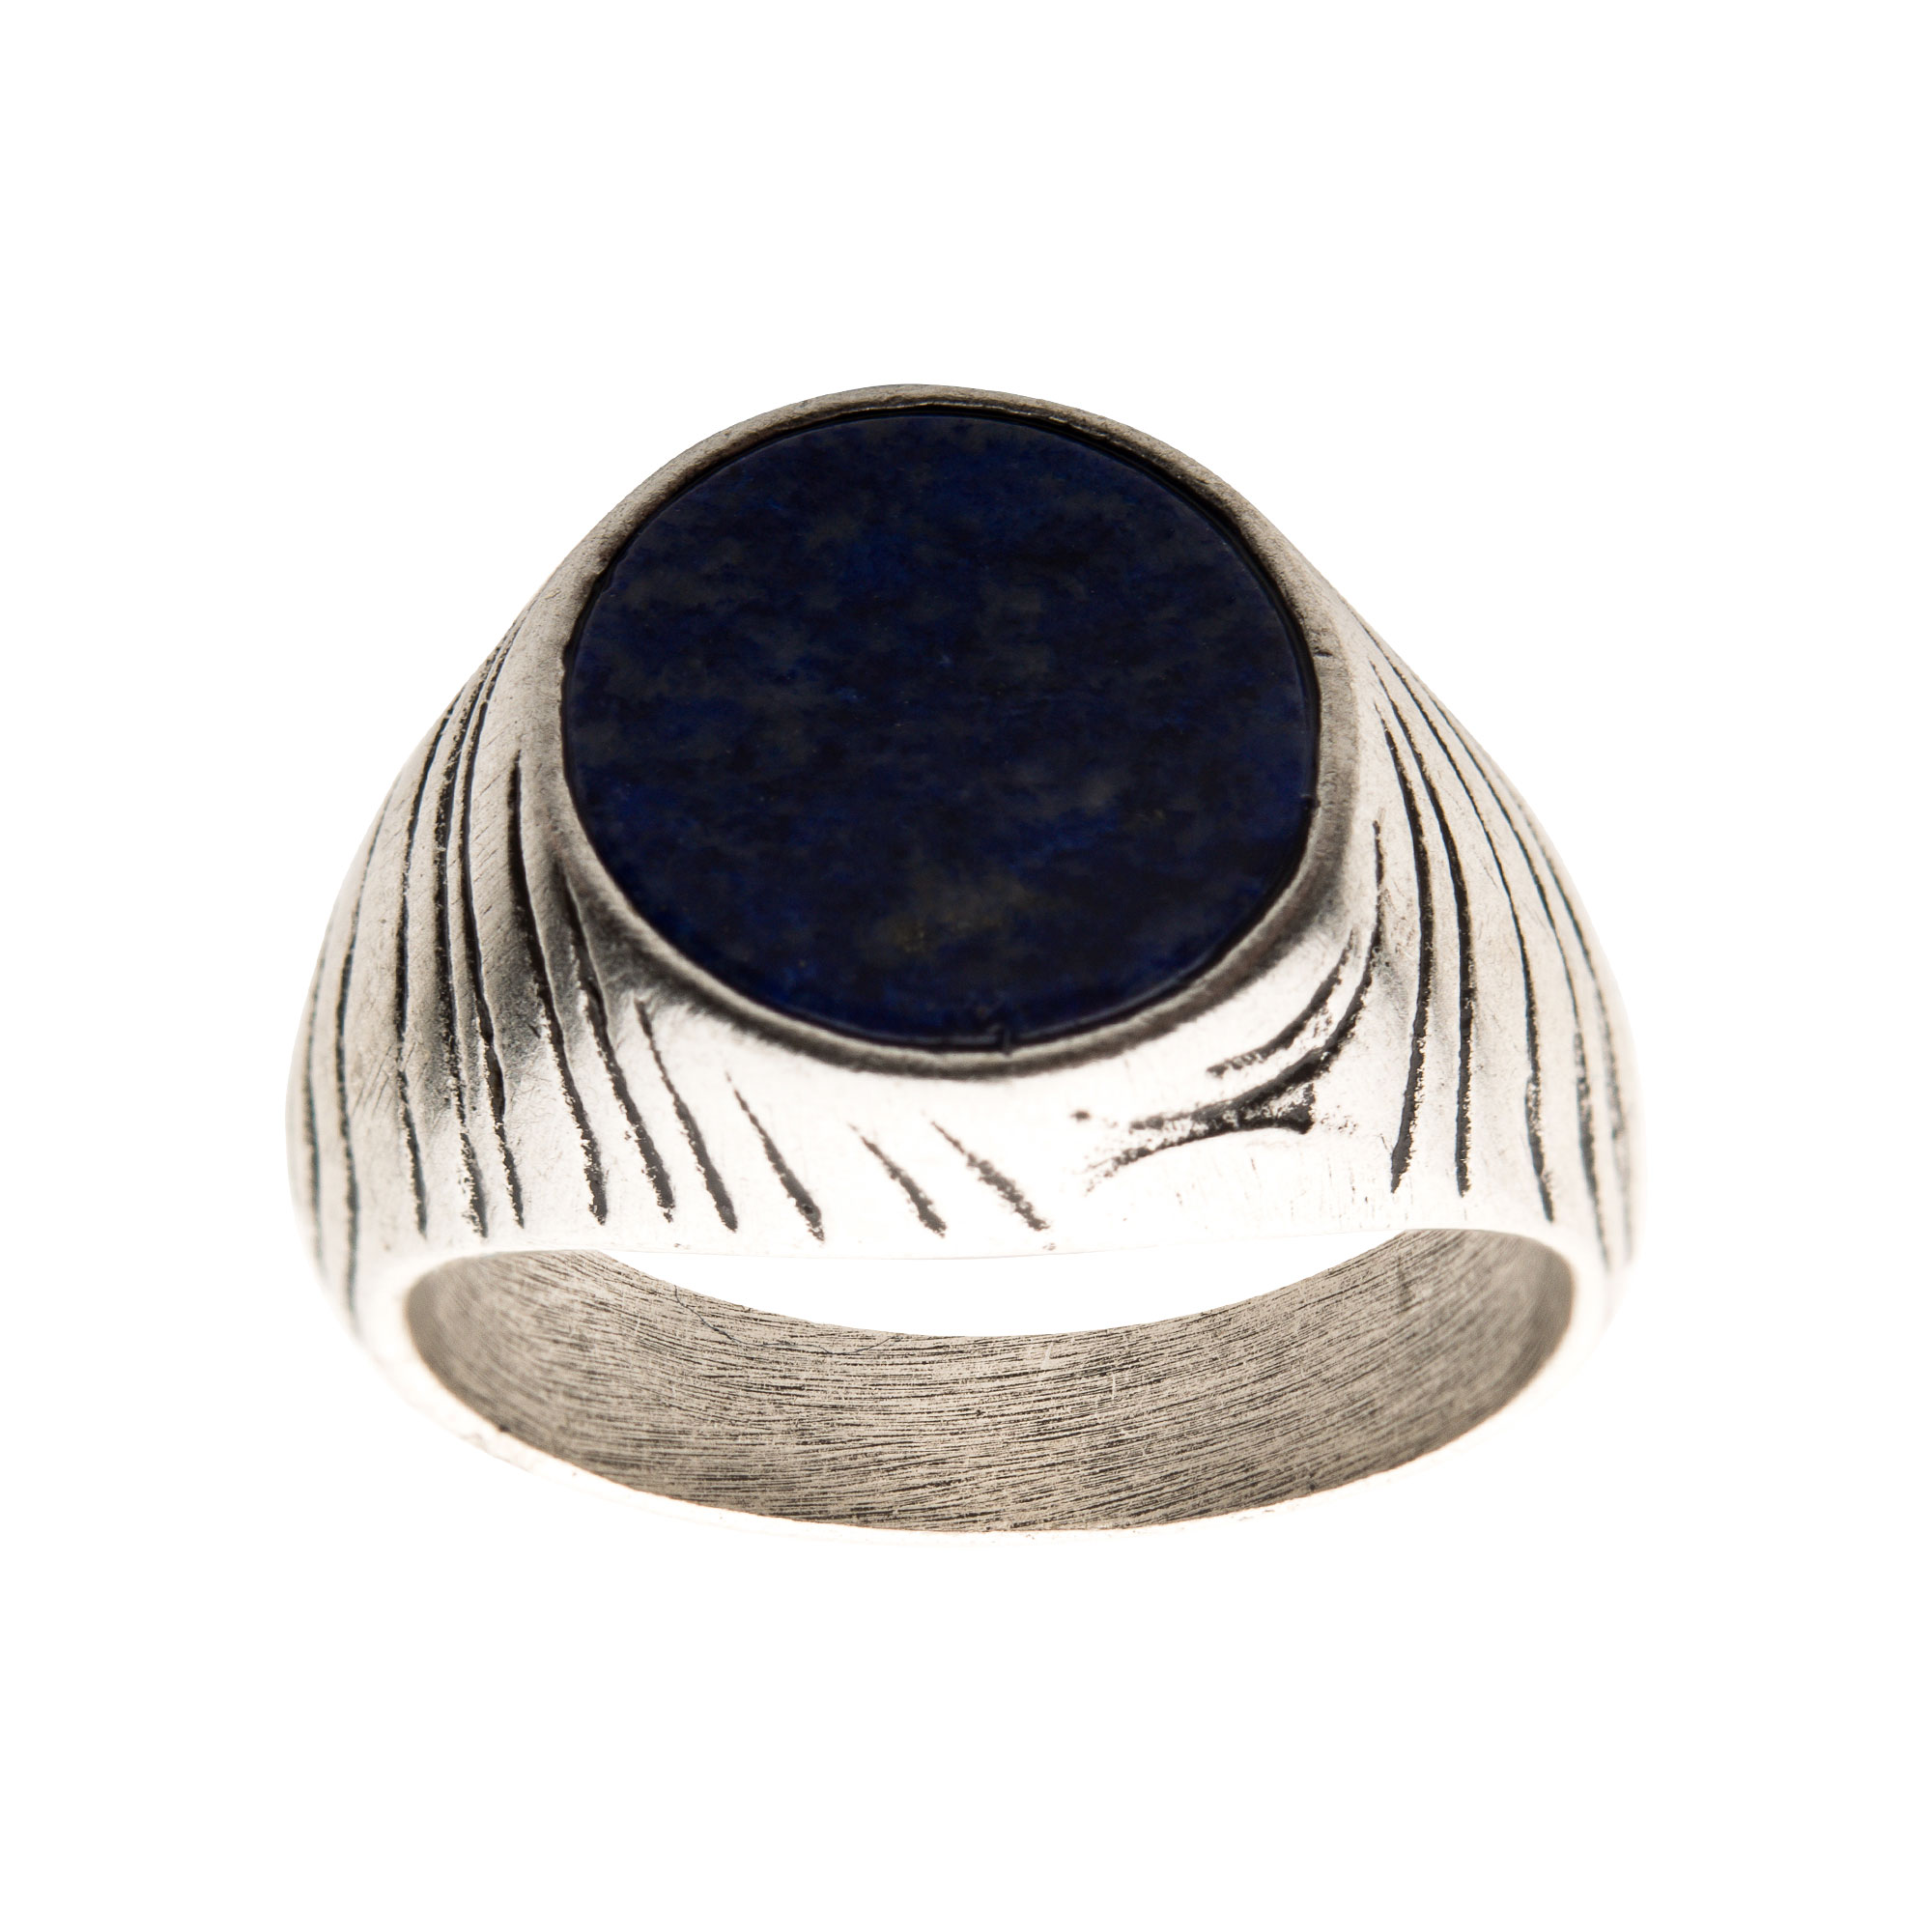 Stainless Steel Silver Plated with Lapis Stone Ring Image 2 Lewis Jewelers, Inc. Ansonia, CT